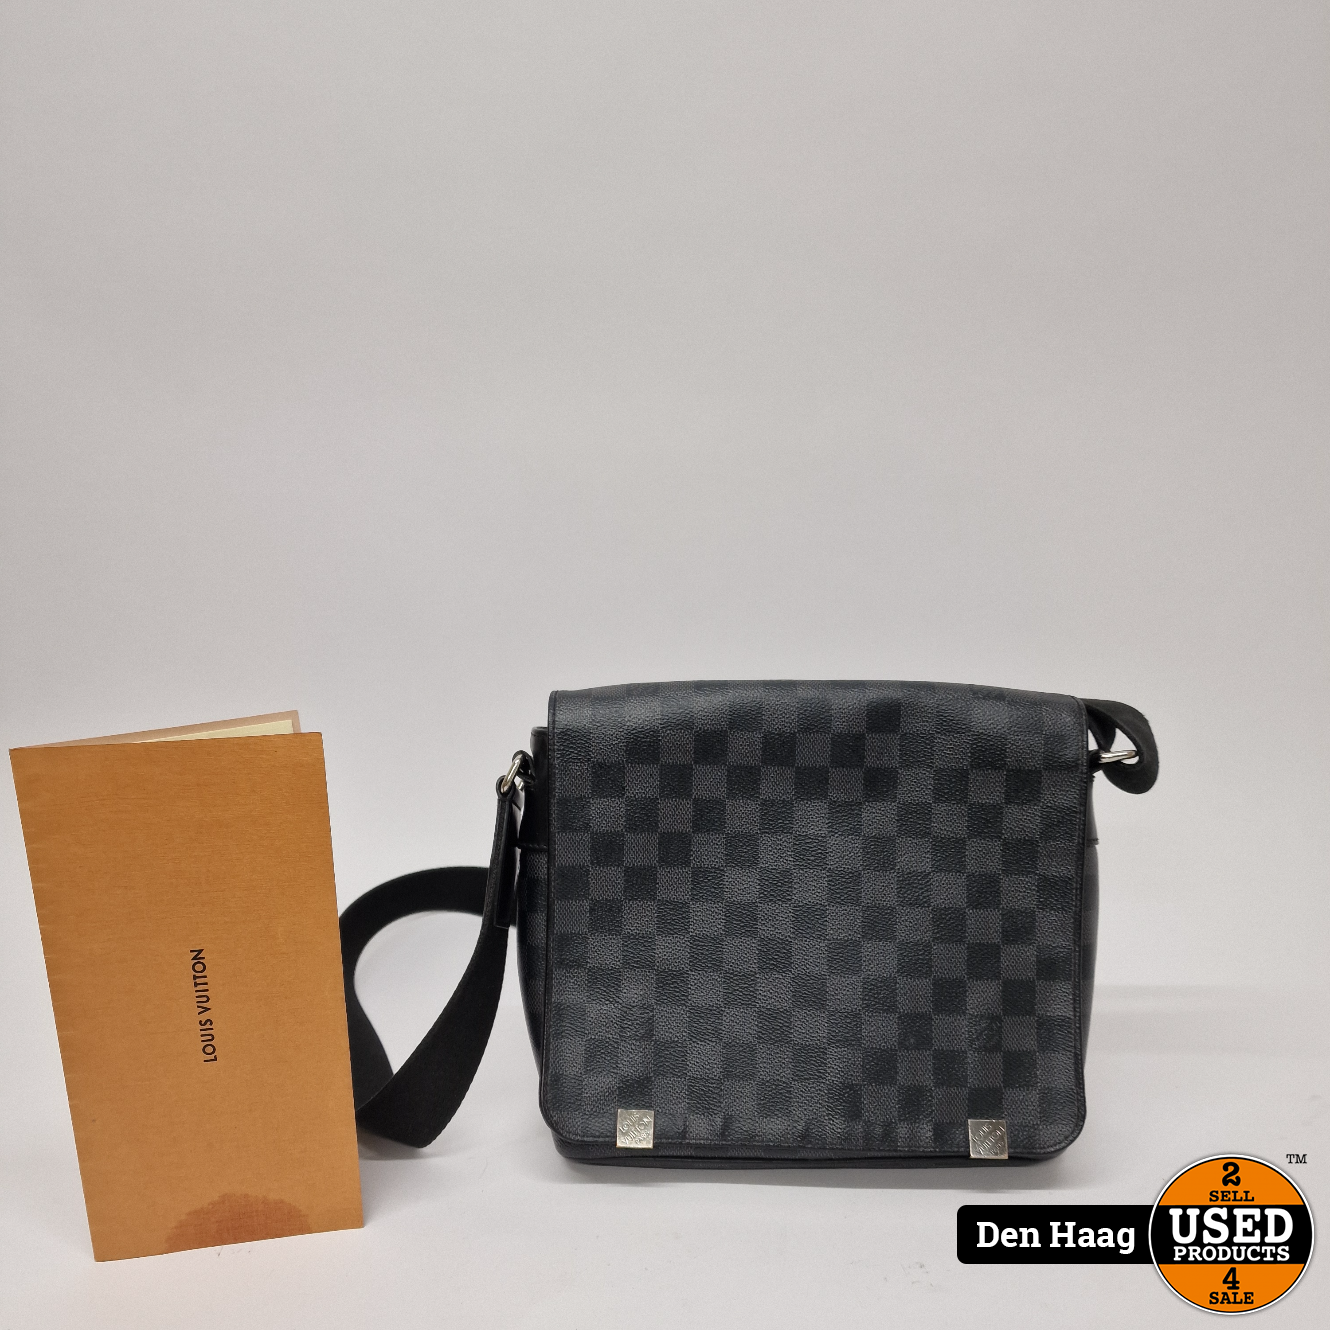 Louis Vuitton N41028 District PM NM Damier Graphite Tas | Nette - Used Products Den Haag